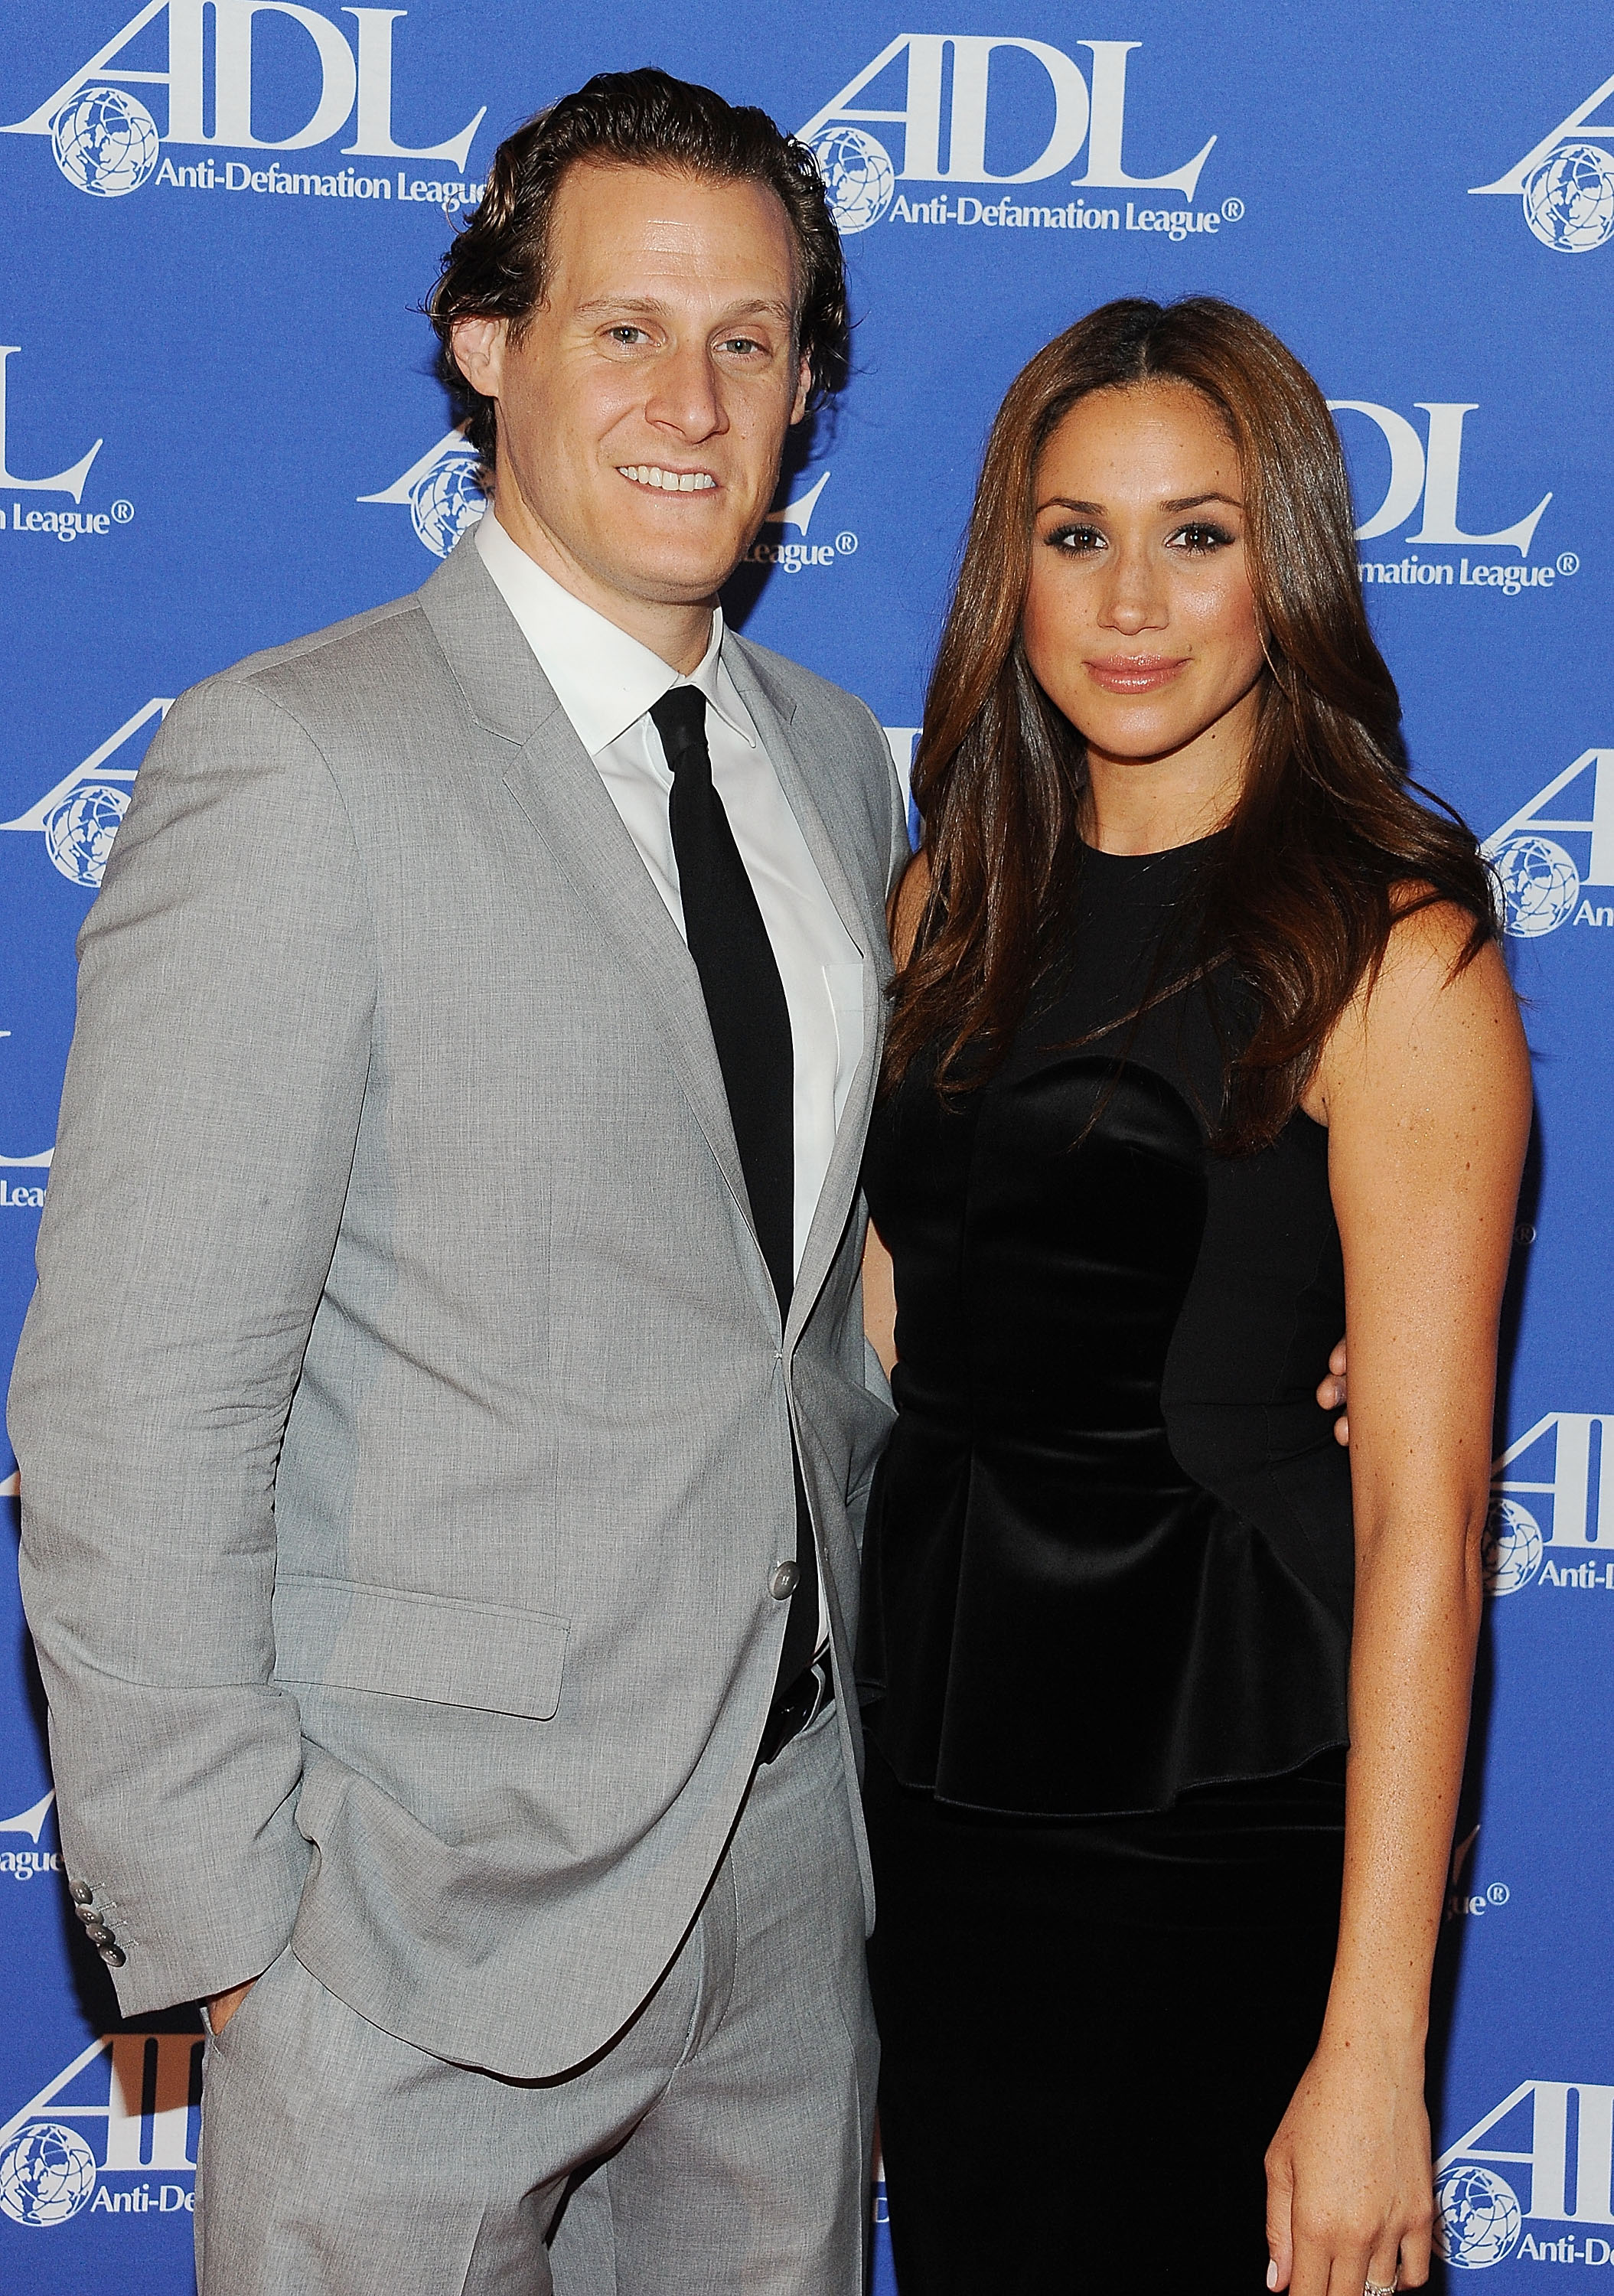 Trevor Engelson and Meghan Markle at the Anti-Defamation League Entertainment Industry Awards Dinner Honoring Ryan Kavanaugh on October 11, 2011, in Beverly Hills, California. | Source: Getty Images